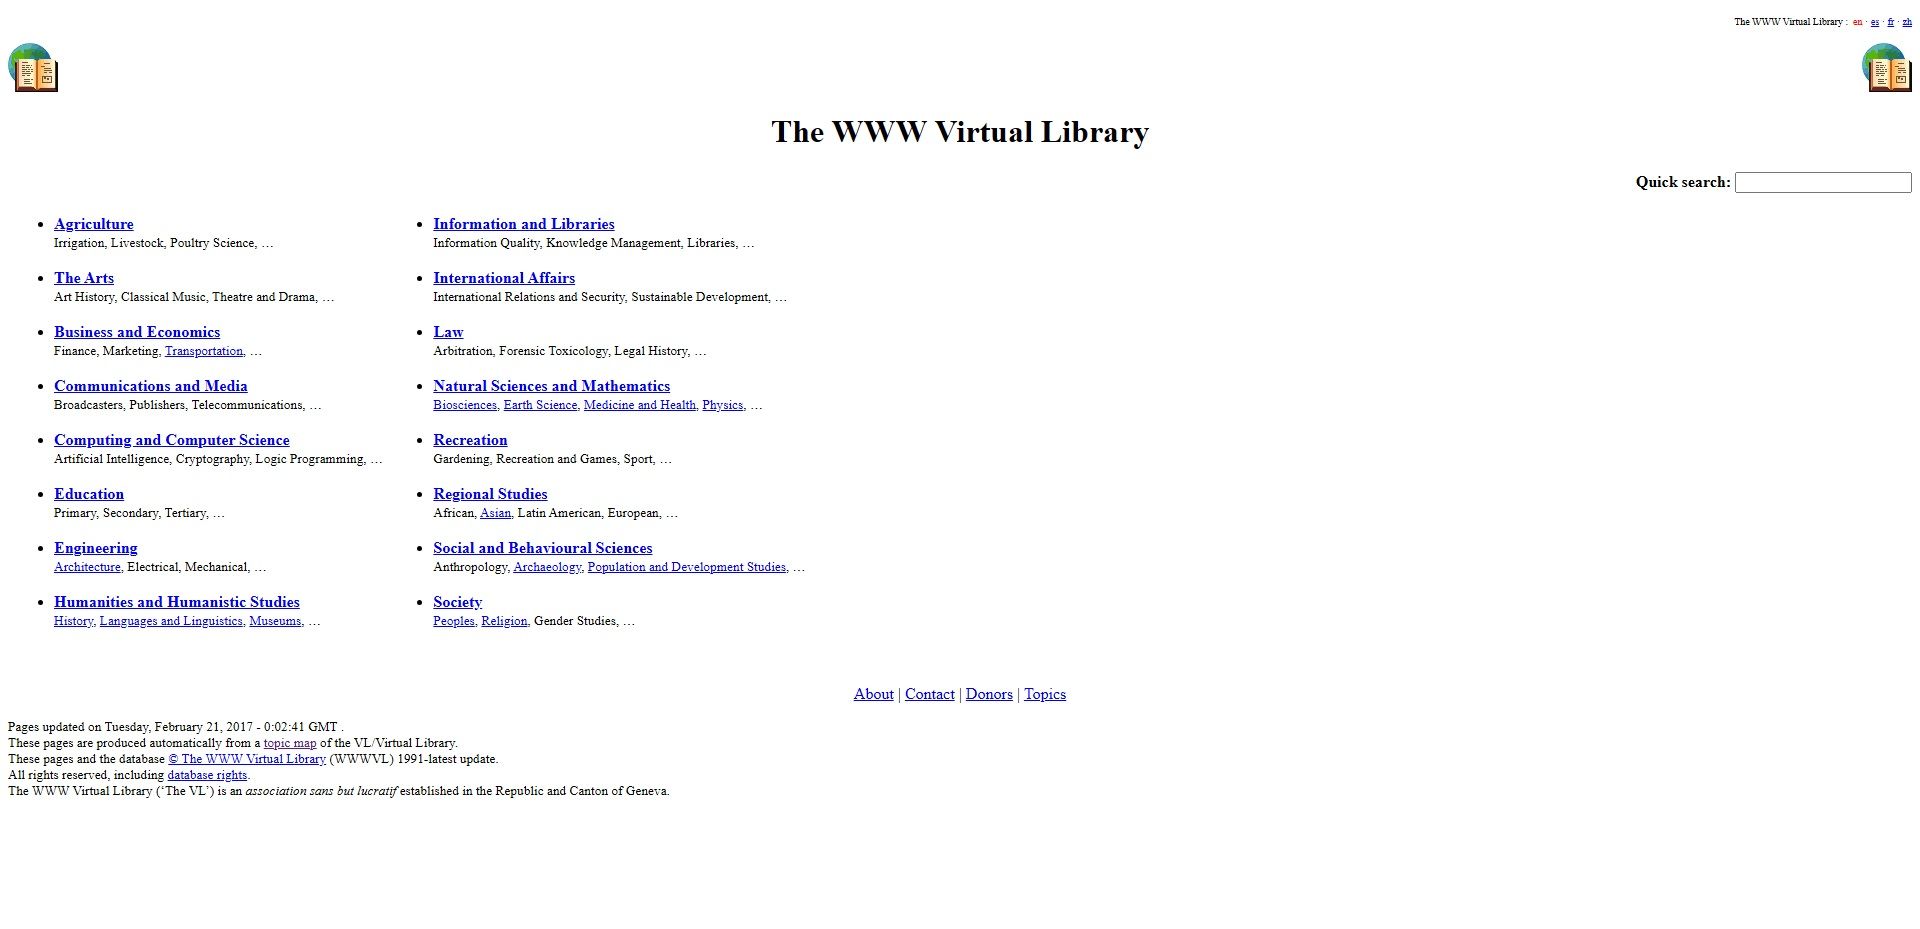 www virtual library search tool